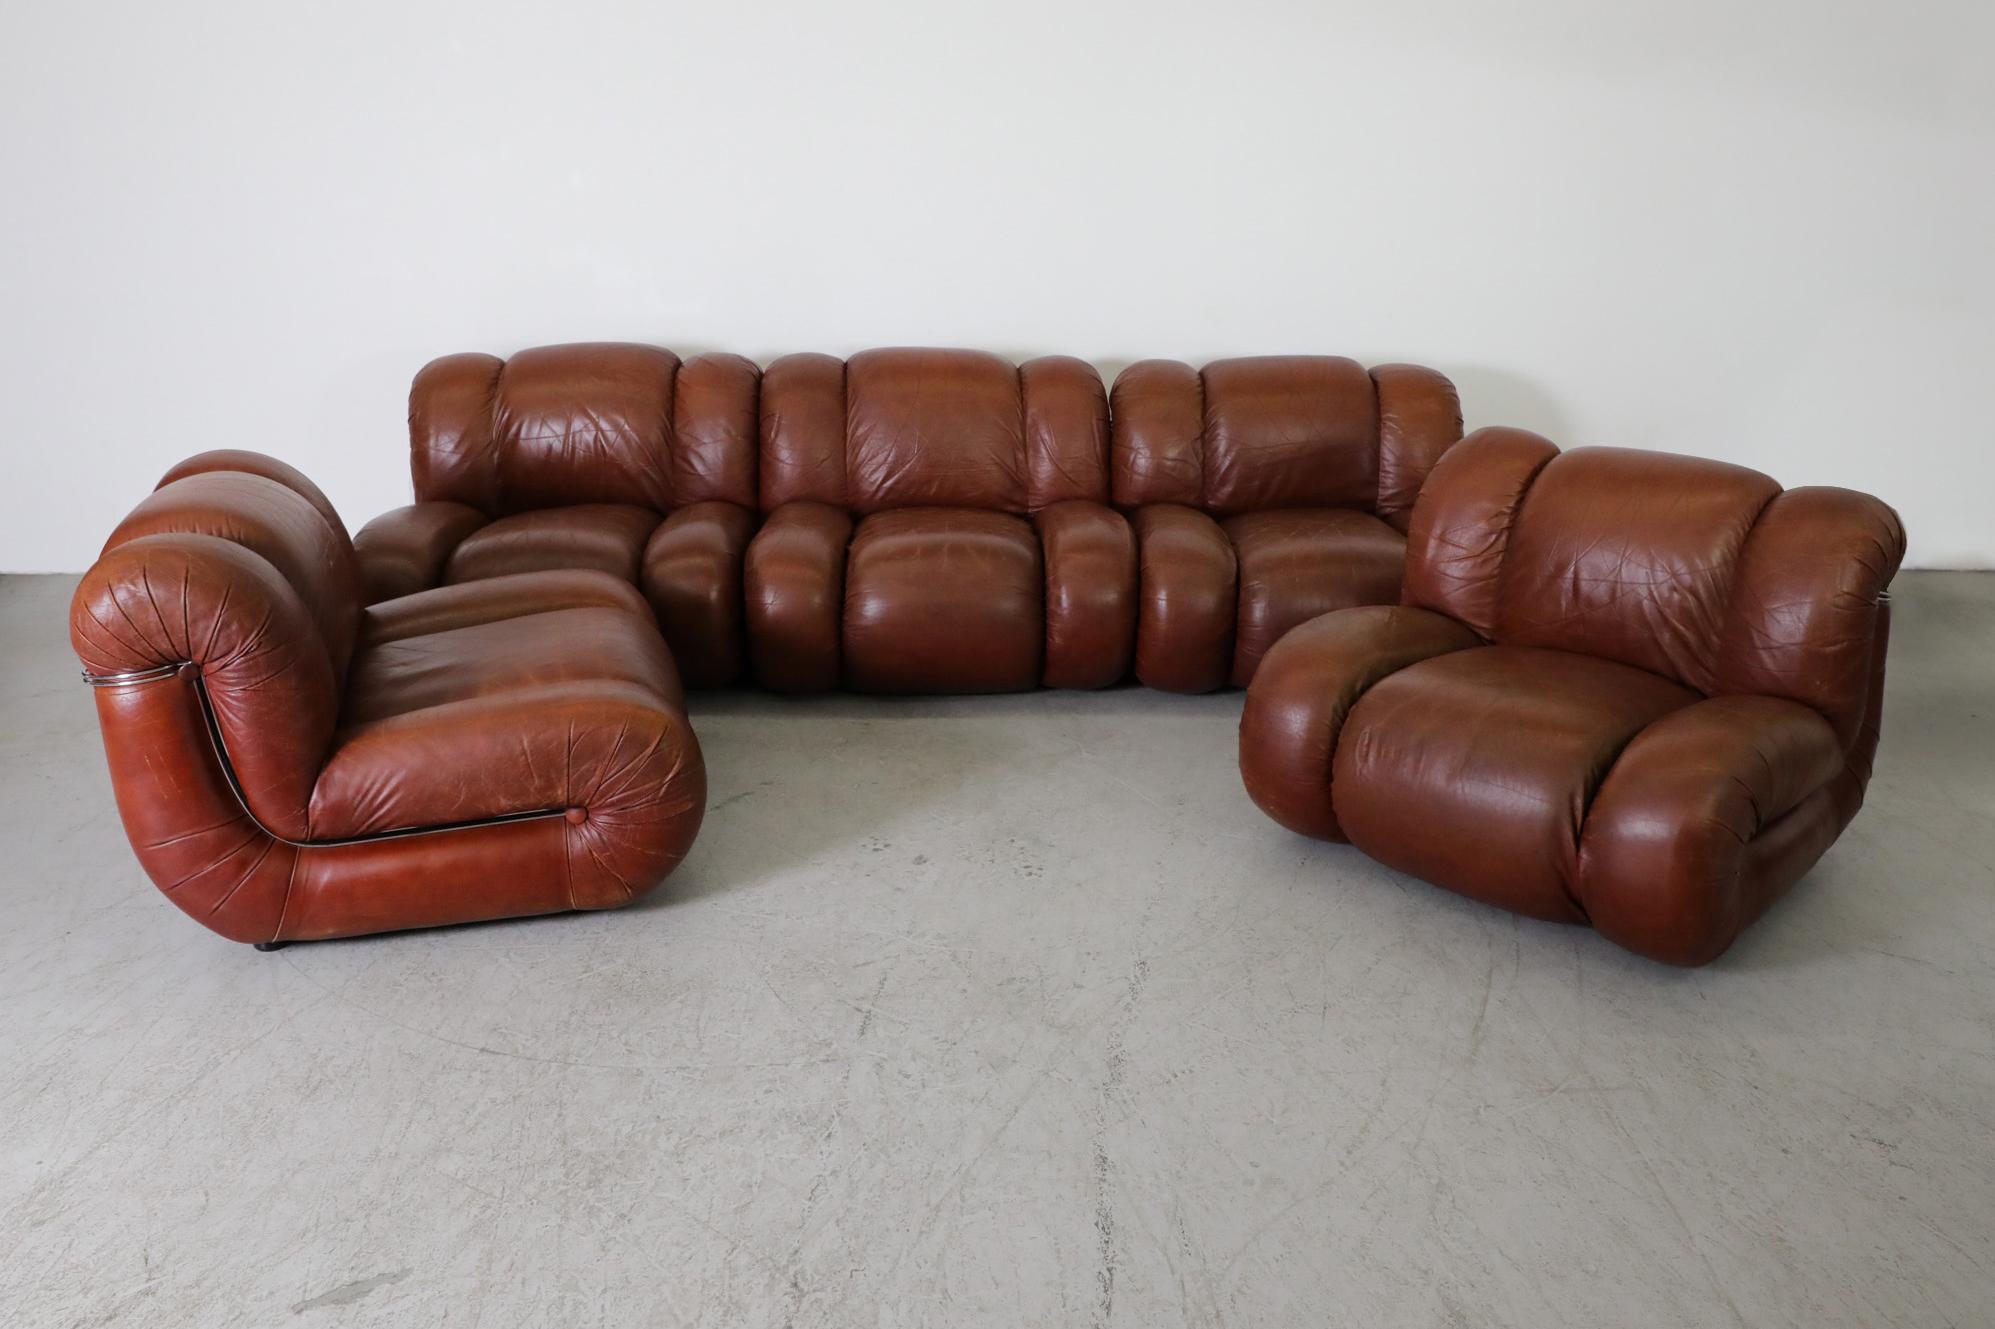 Italian Mimo Padova Velasquez Modular Sofa In Brown Leather And Chrome, Italy 1970s For Sale